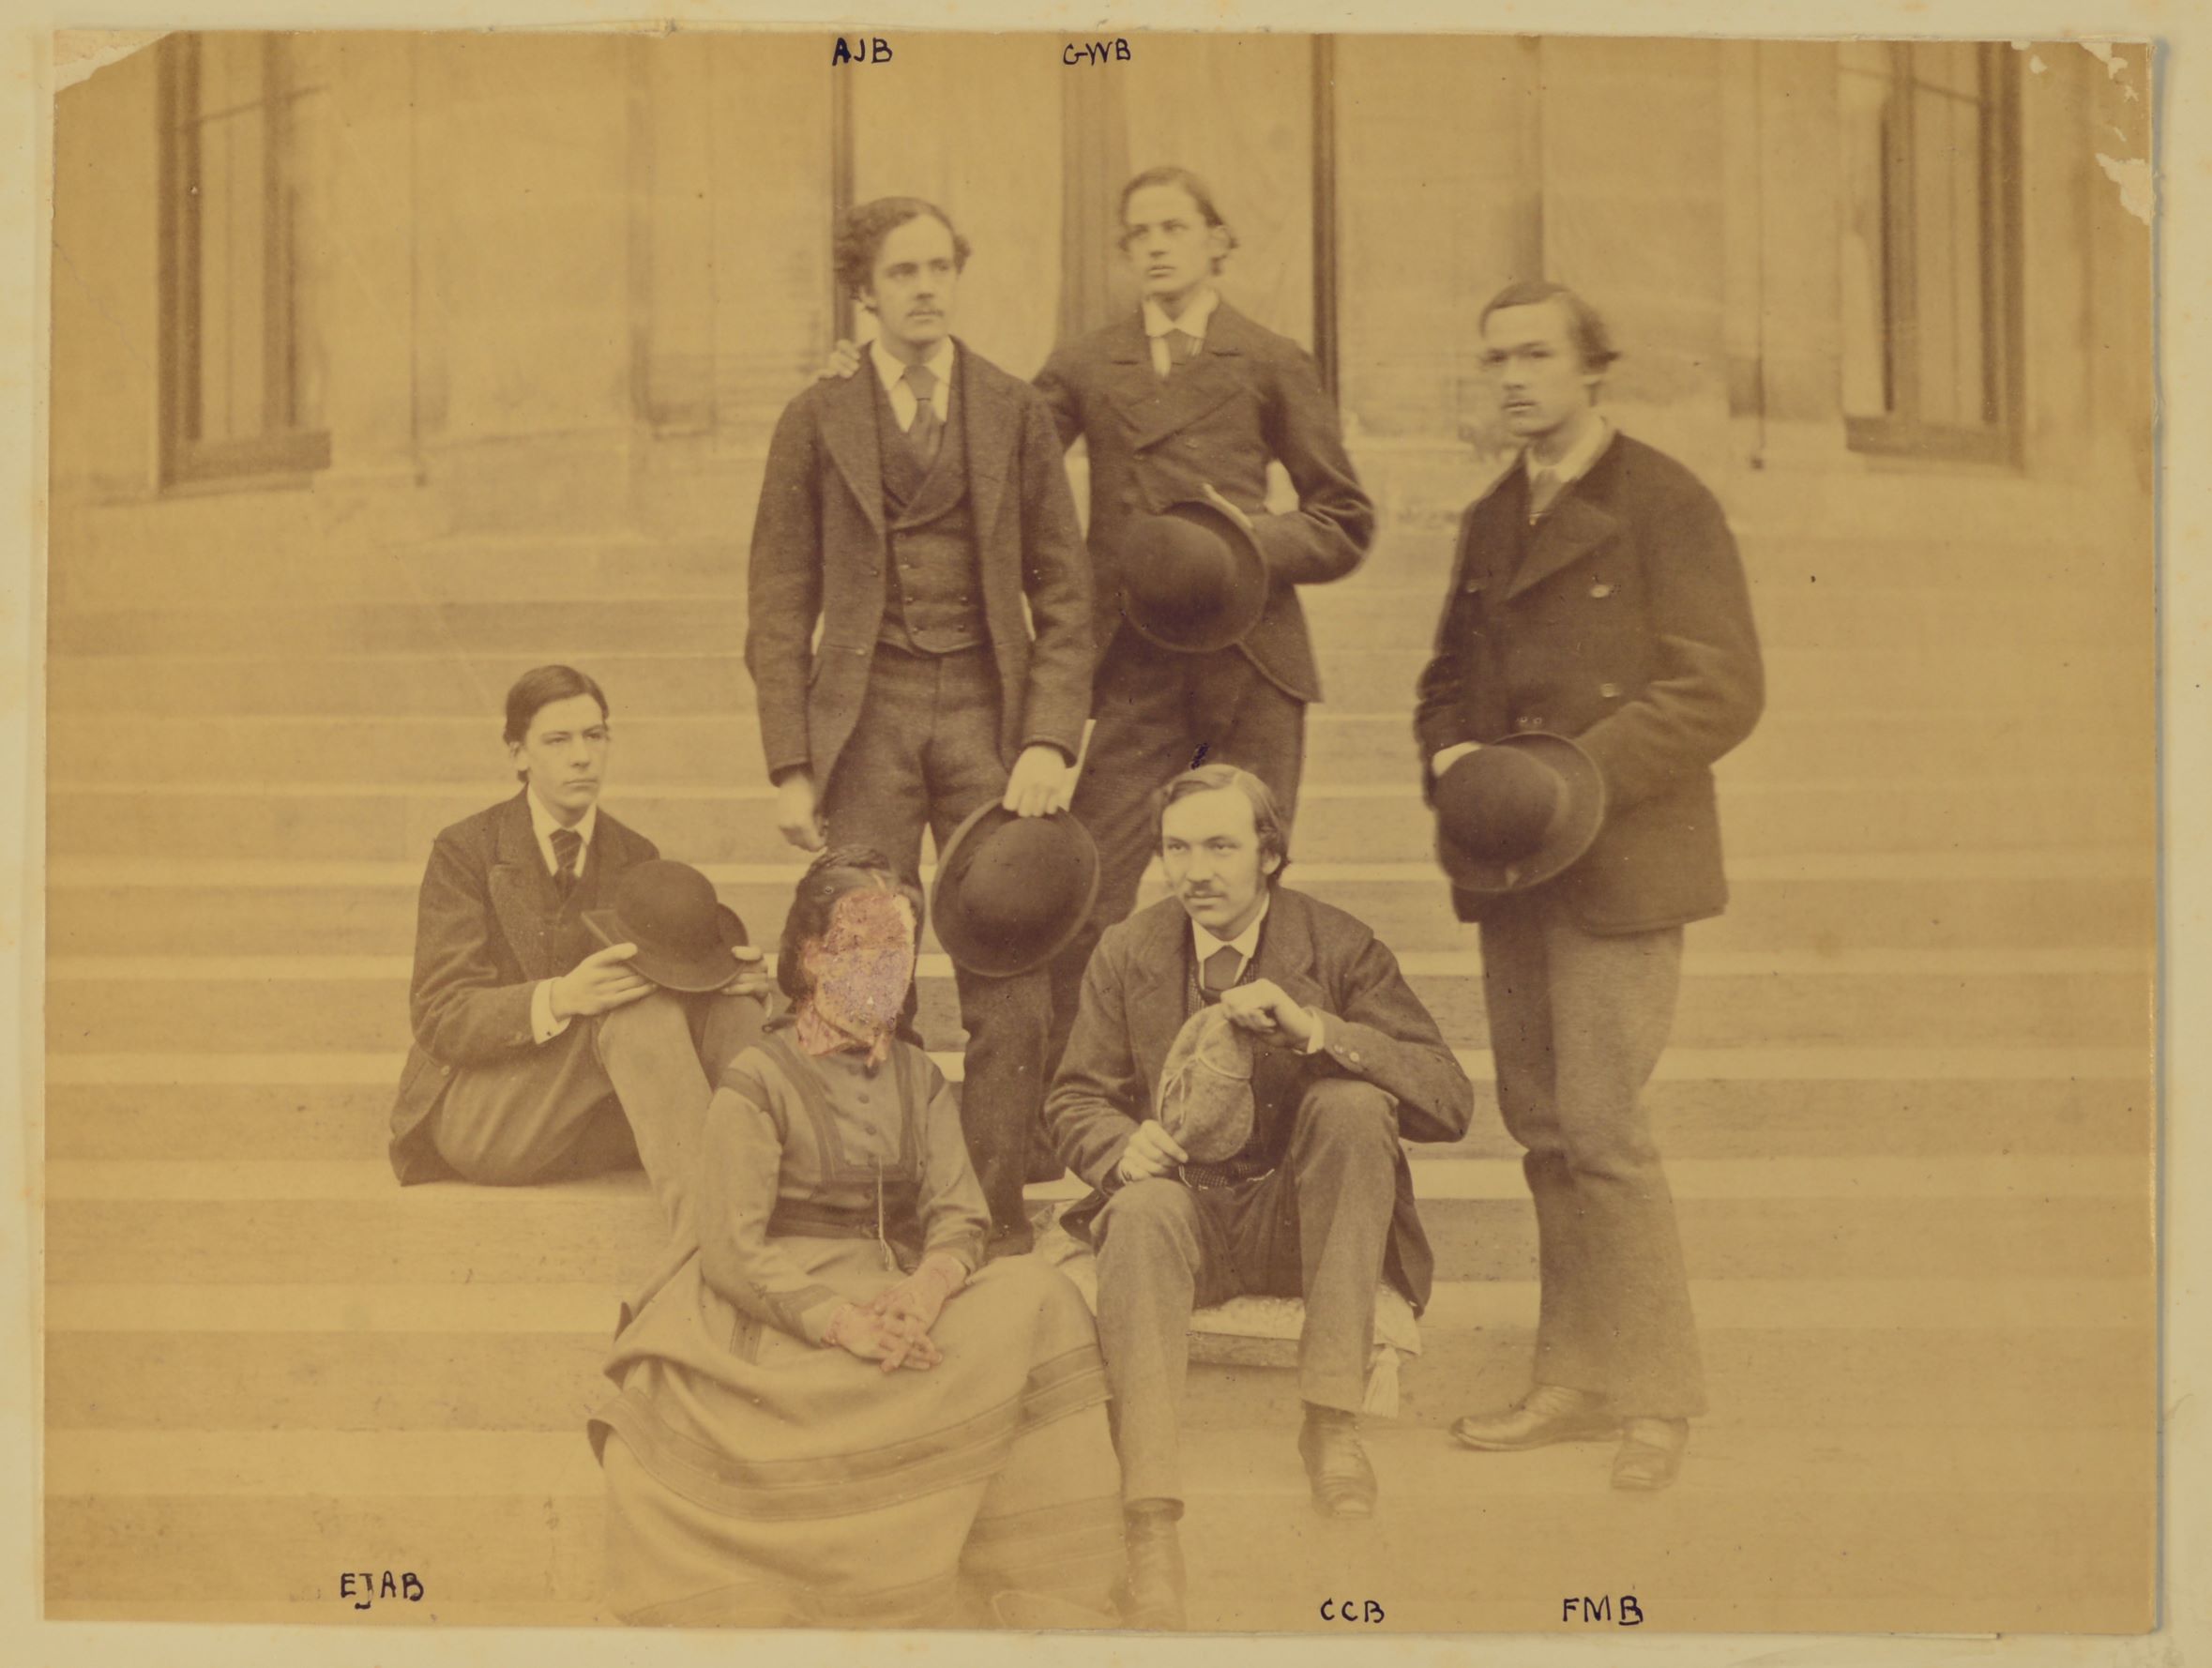 A sepia photograph of four men and a woman, whose face is scratched out, on some outside steps